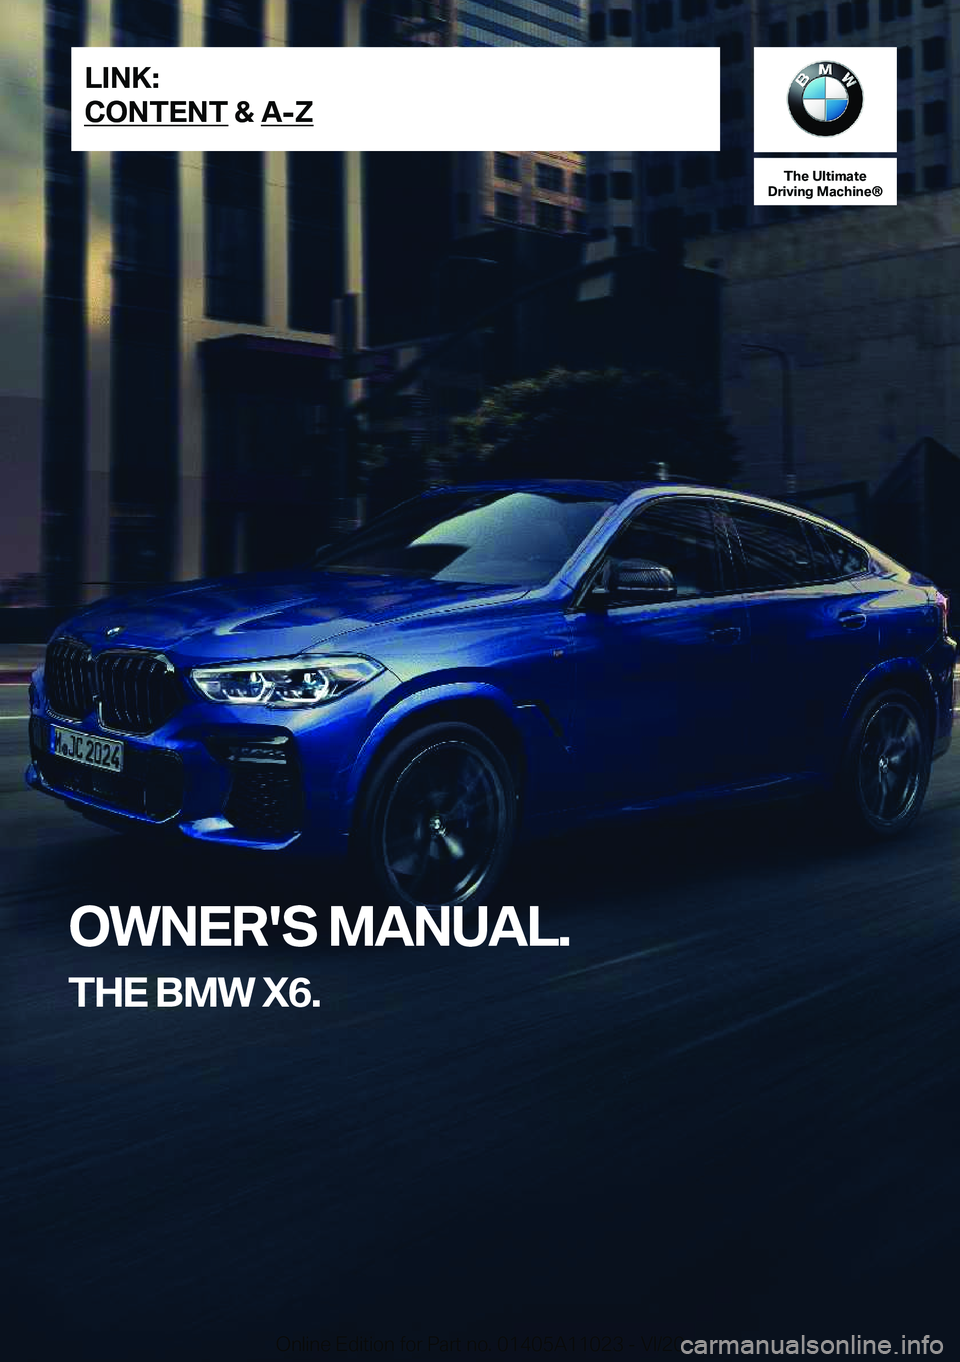 BMW X6 2021  Owners Manual �T�h�e��U�l�t�i�m�a�t�e
�D�r�i�v�i�n�g��M�a�c�h�i�n�e�n
�O�W�N�E�R�'�S��M�A�N�U�A�L�.
�T�H�E��B�M�W��X�6�.�L�I�N�K�:
�C�O�N�T�E�N�T��&��A�-�Z�O�n�l�i�n�e��E�d�i�t�i�o�n��f�o�r��P�a�r�t�